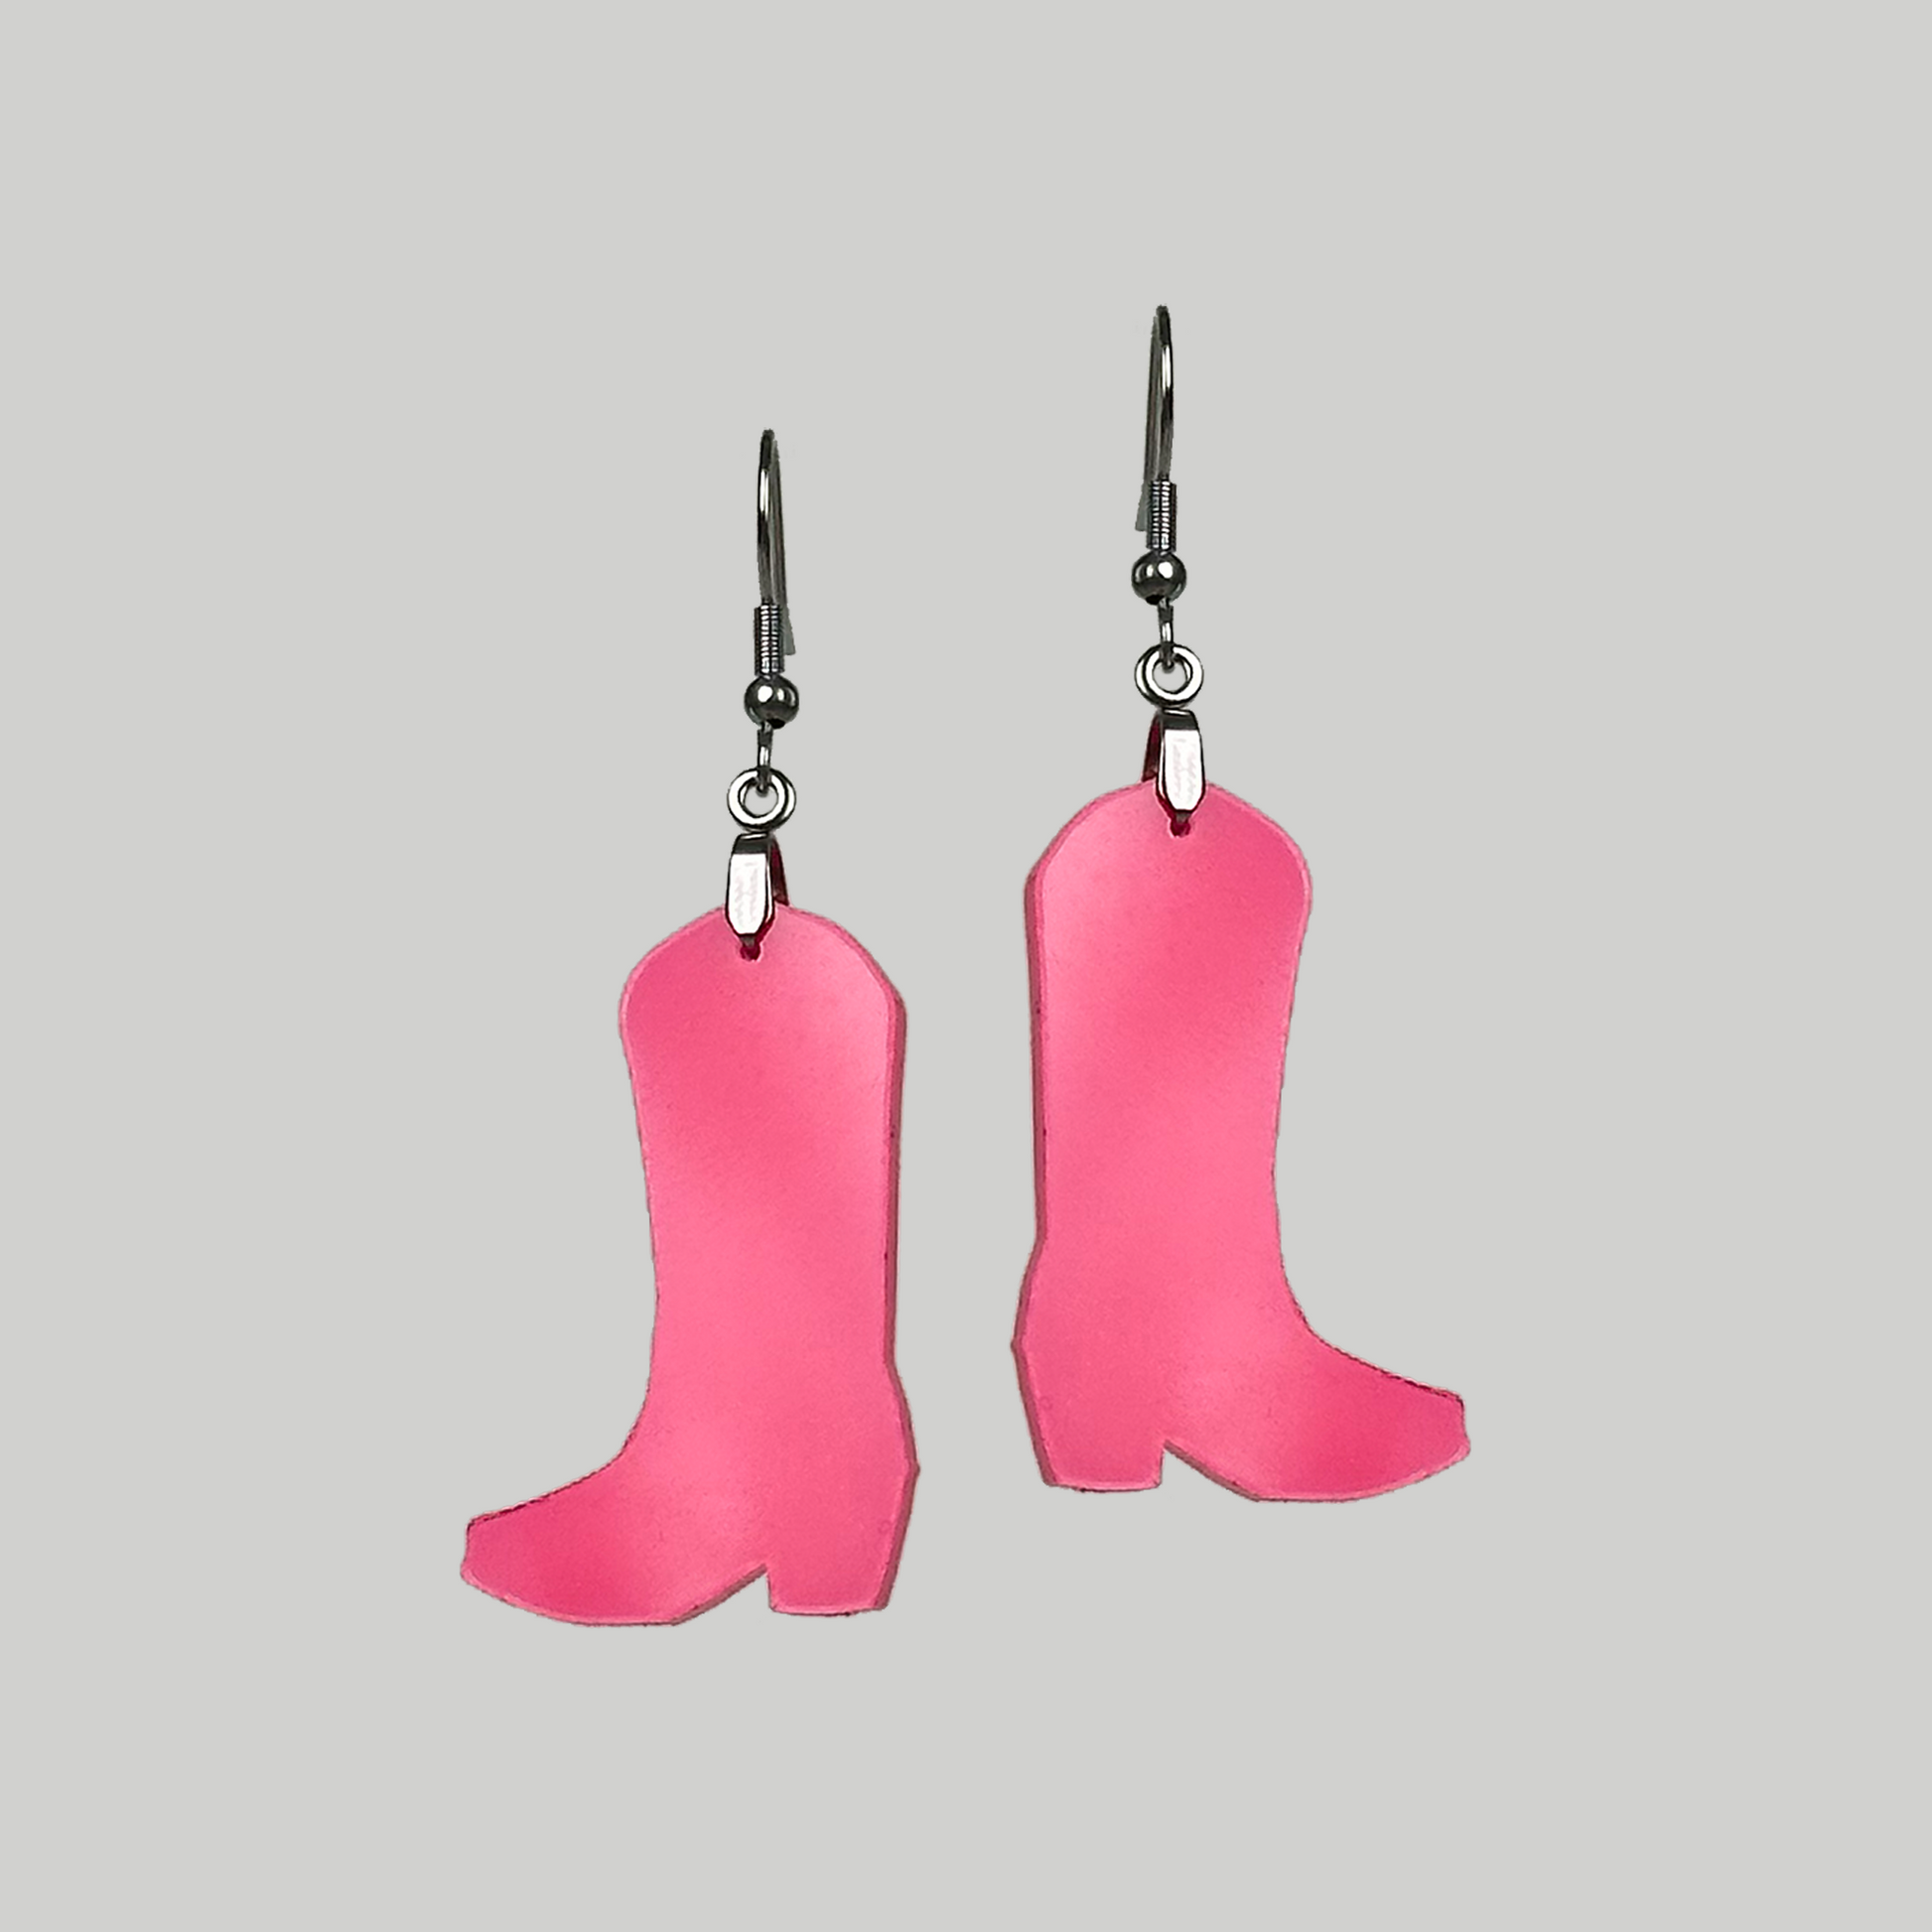 Cowgirl Boots Earrings: Western charm meets fashion with these stylish earrings featuring miniature Pink cowgirl boot designs for a playful look.